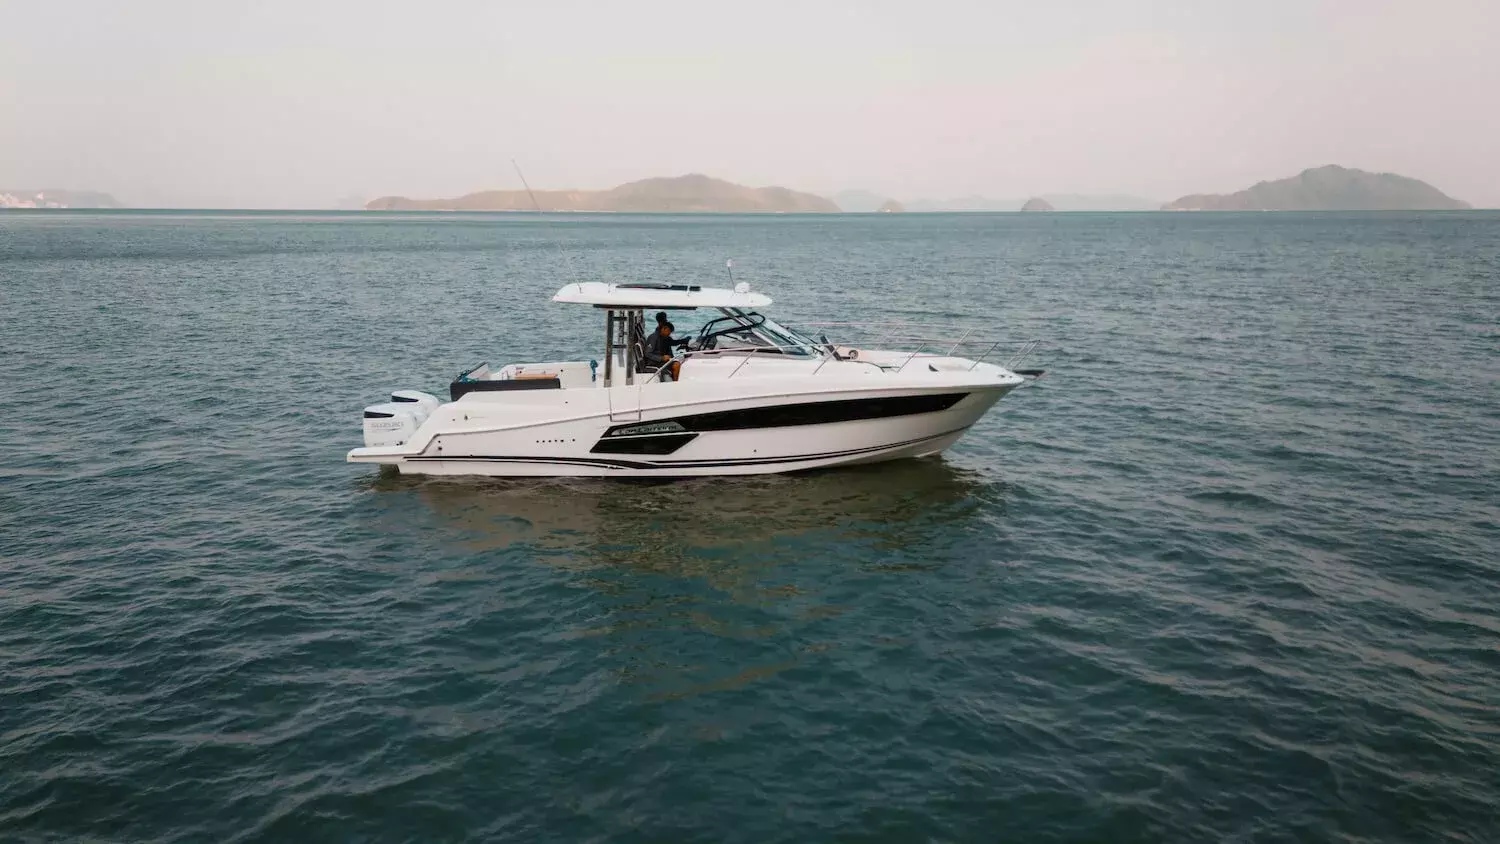 NaNea by Jeanneau - Top rates for a Rental of a private Power Boat in Thailand